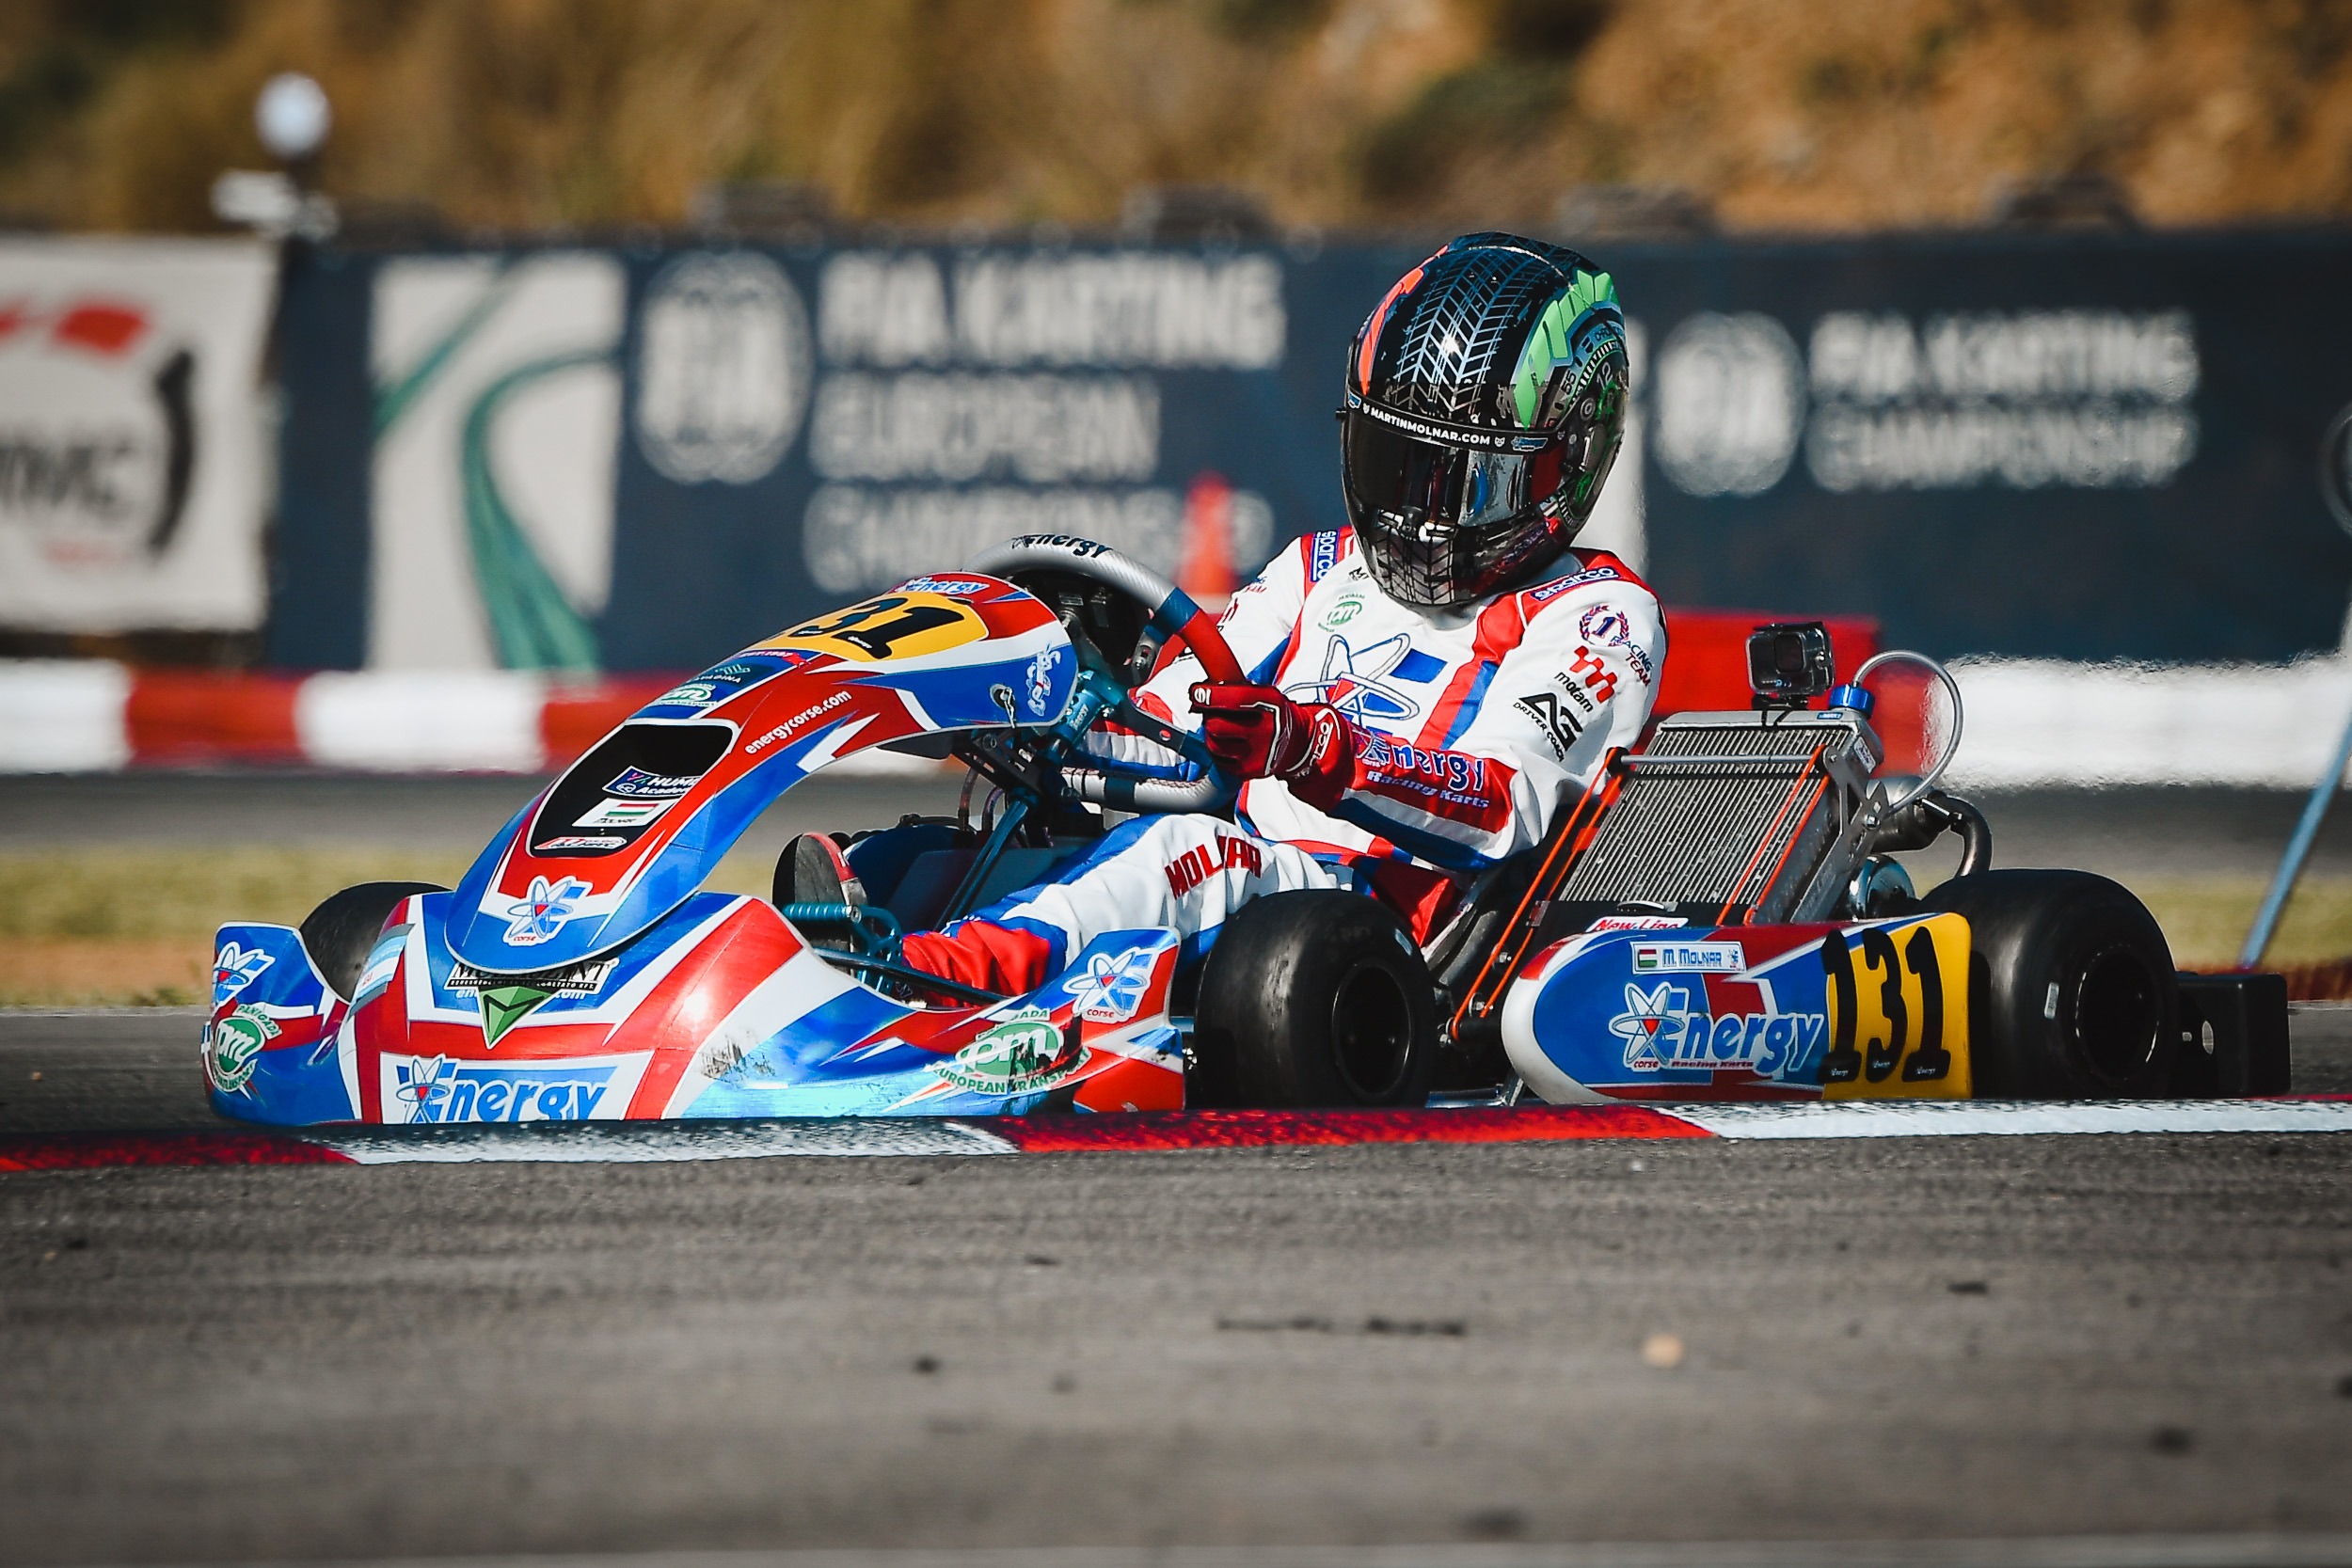 The European Karting Championship started well for Martin Molnár